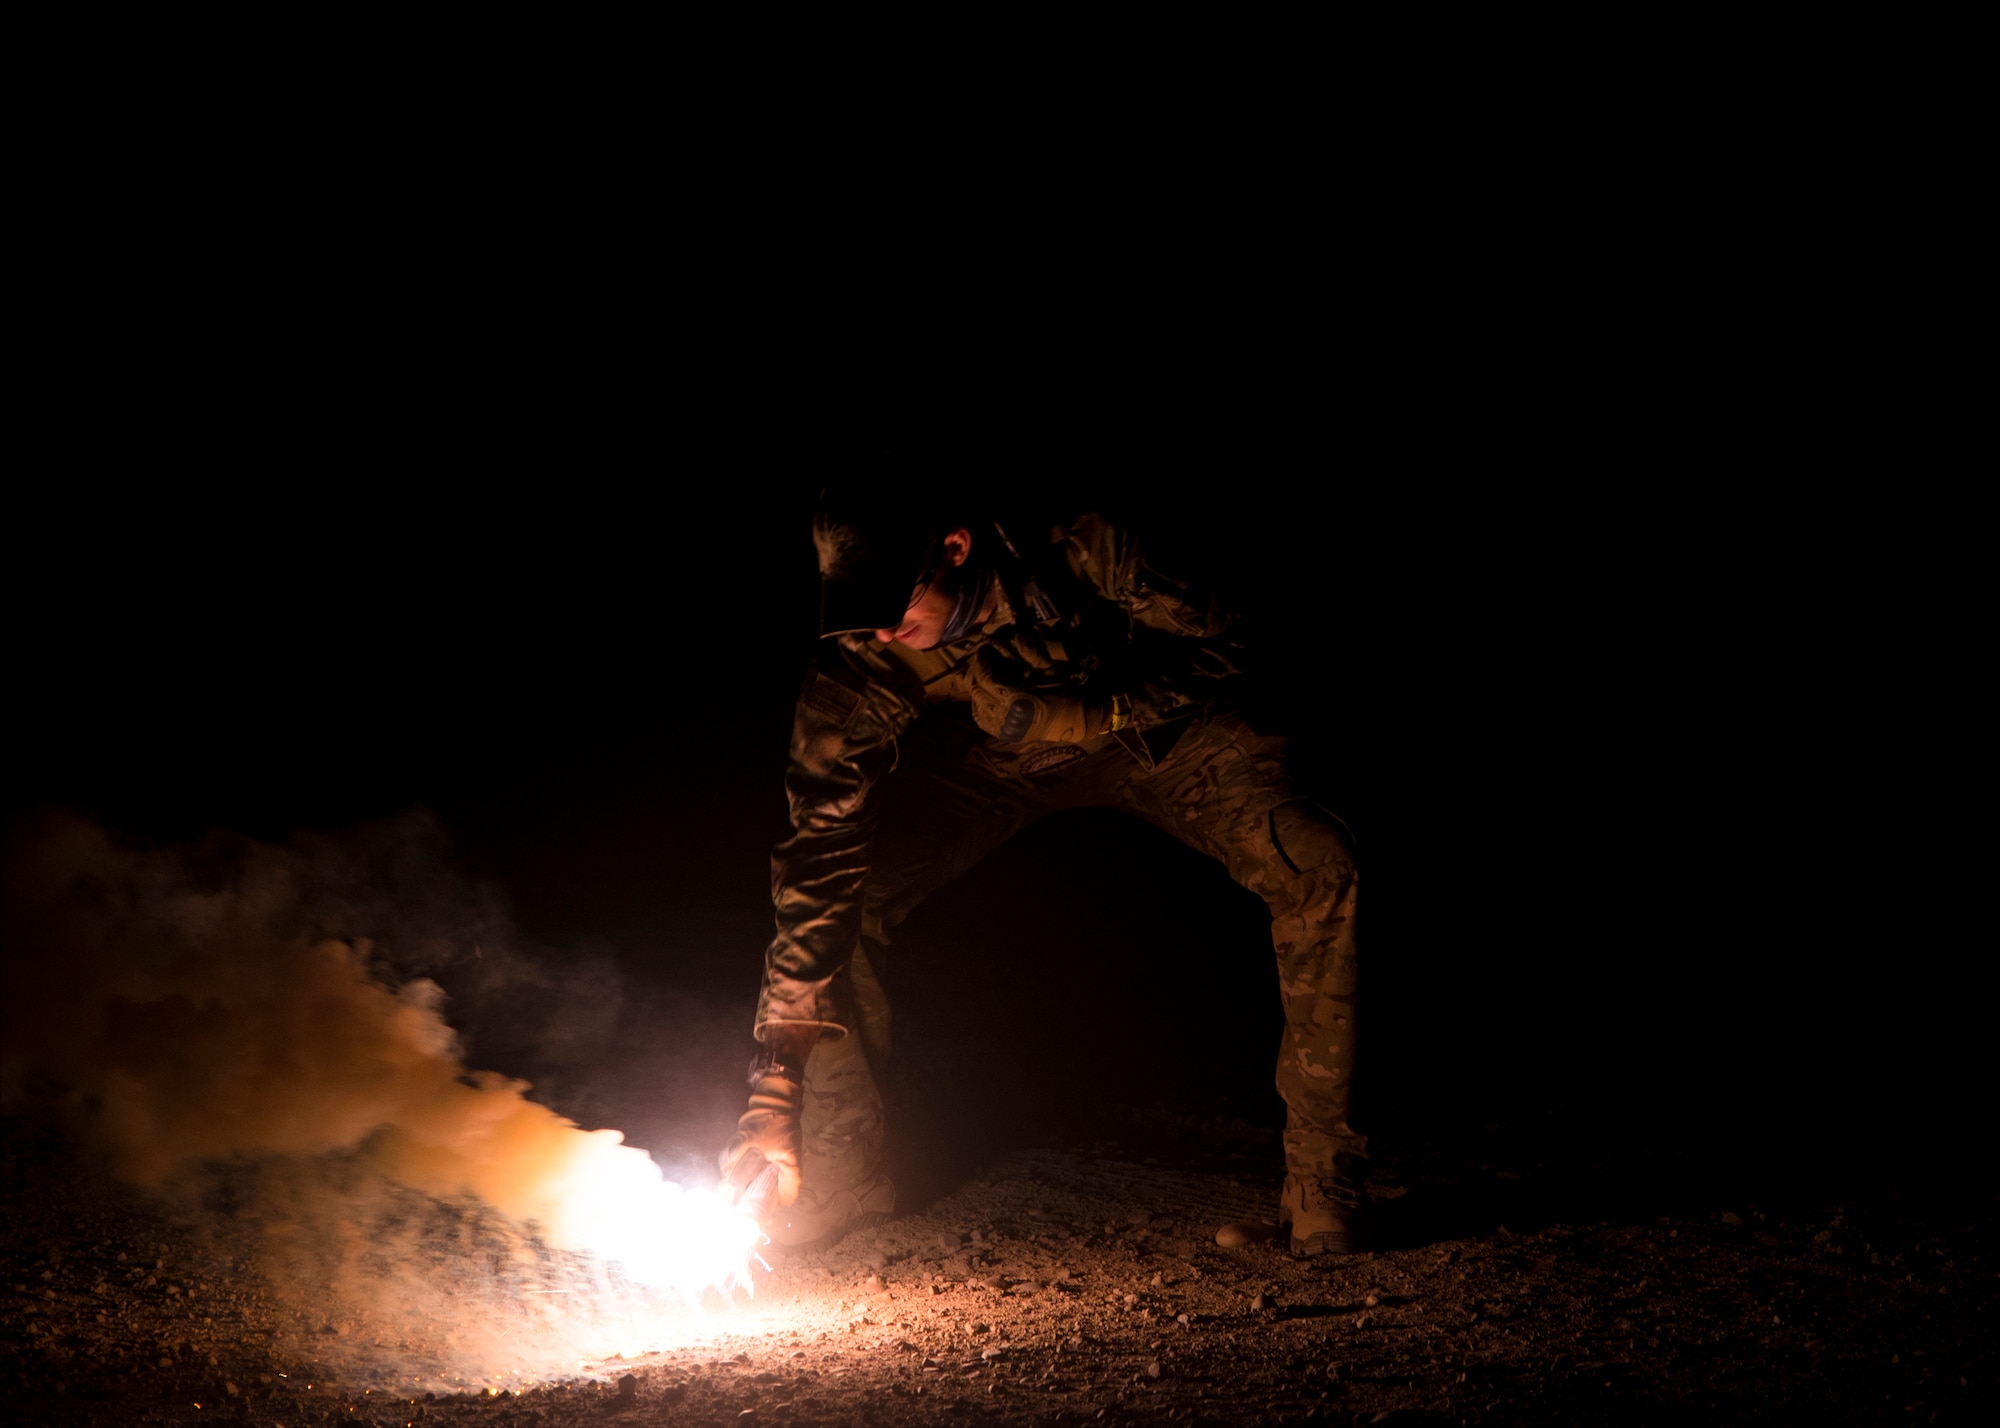 Staff Sgt. David Chorpeninng, 366th Fighter Wing survival, evasion, resistance and escape specialist, pops the illumination end of a MK-124 marine smoke and illumination signal Sept. 26, 2019, at Saylor Creek Bombing Range, Idaho.